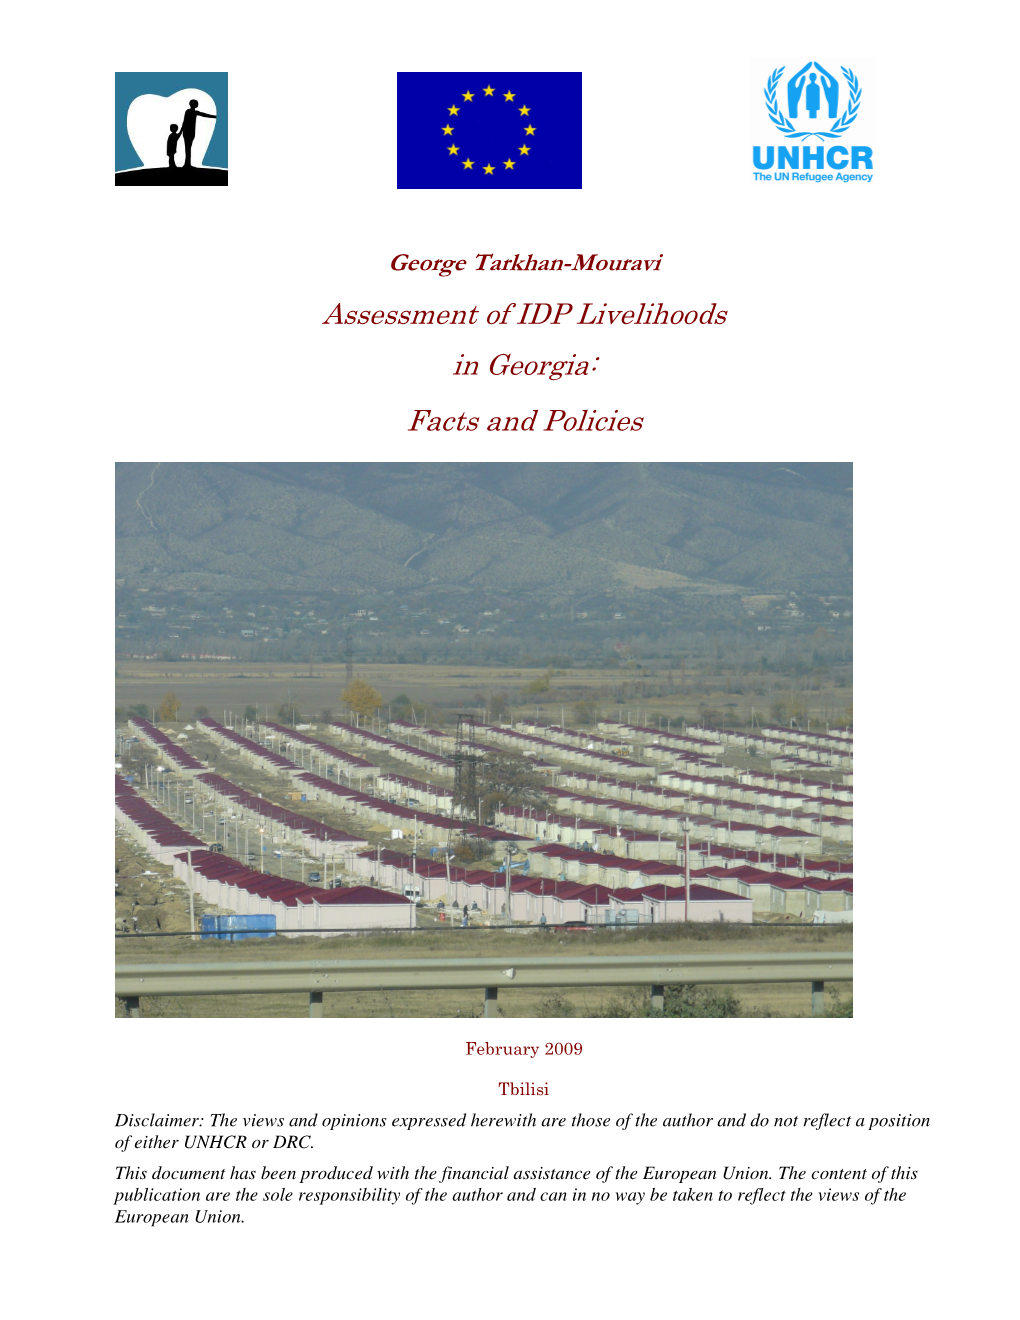 Assessment of IDP Livelihoods in Georgia: Facts and Policies